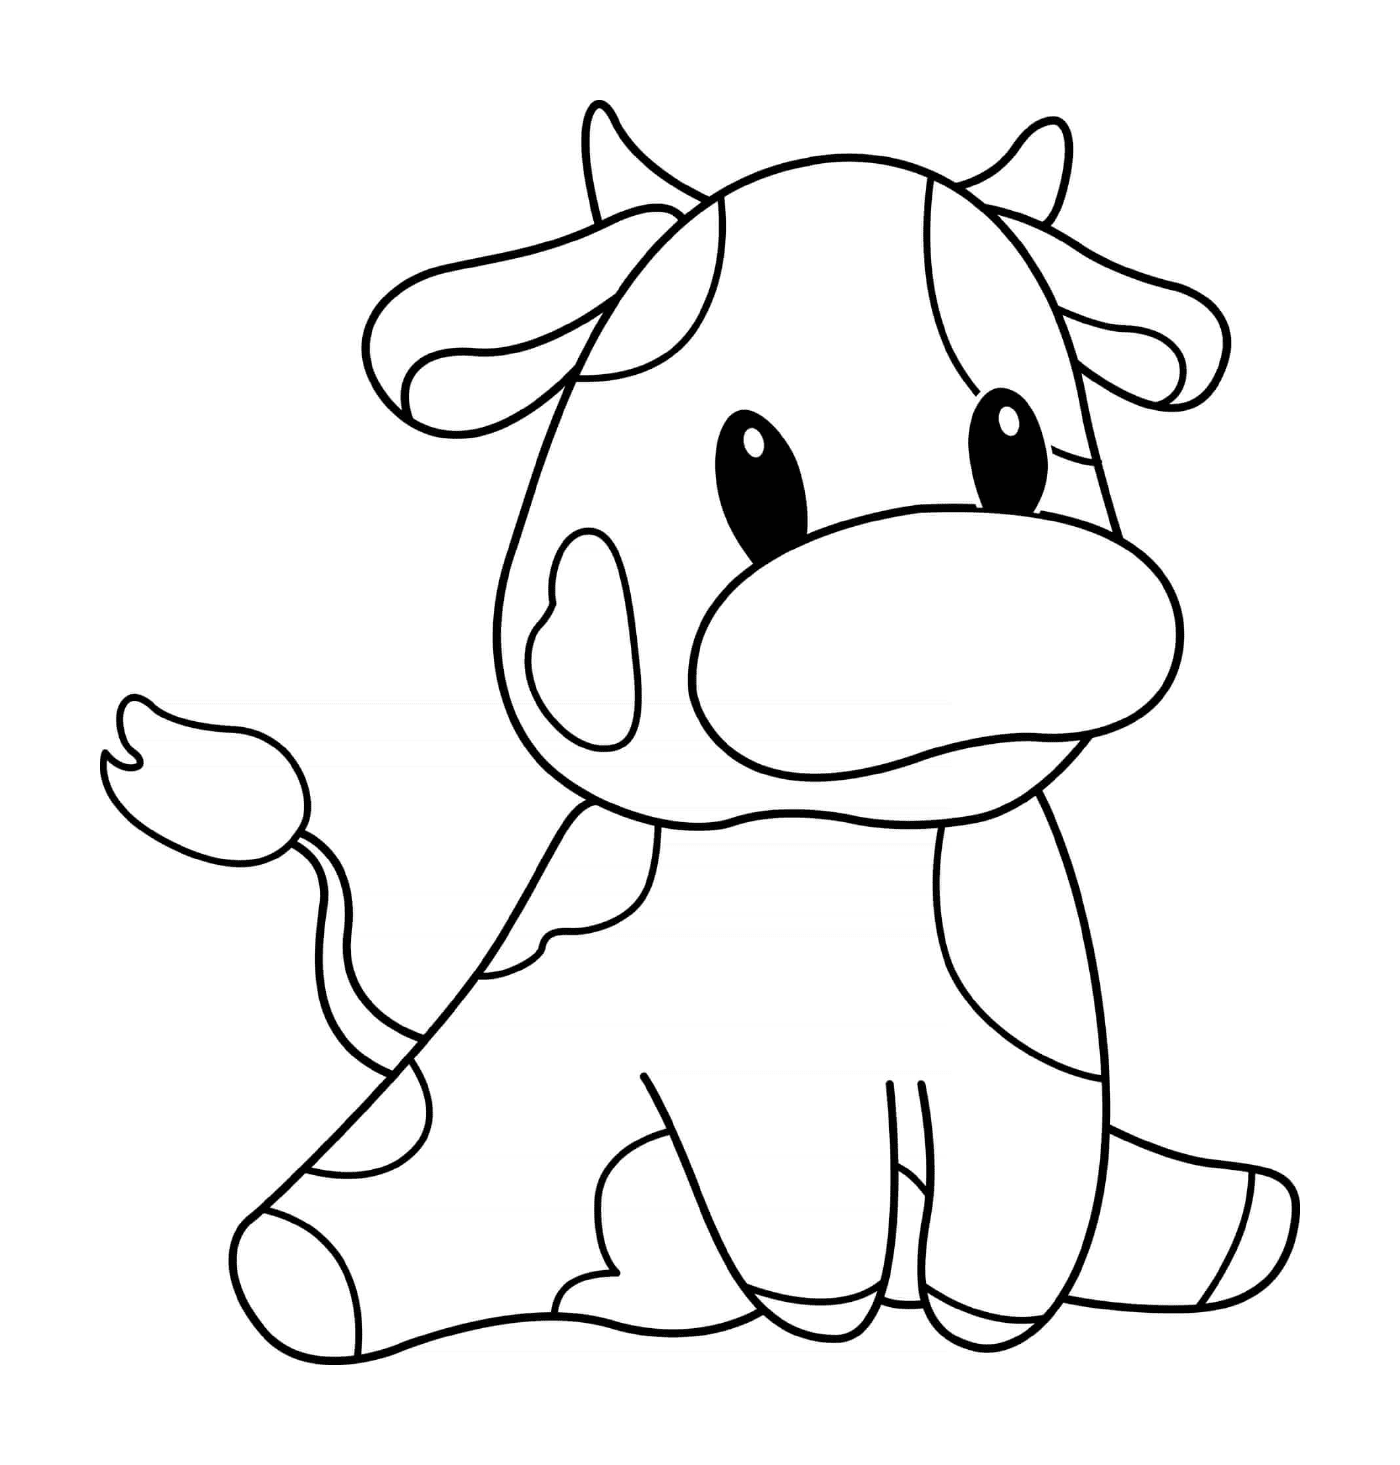  Little animal cow from the farm 